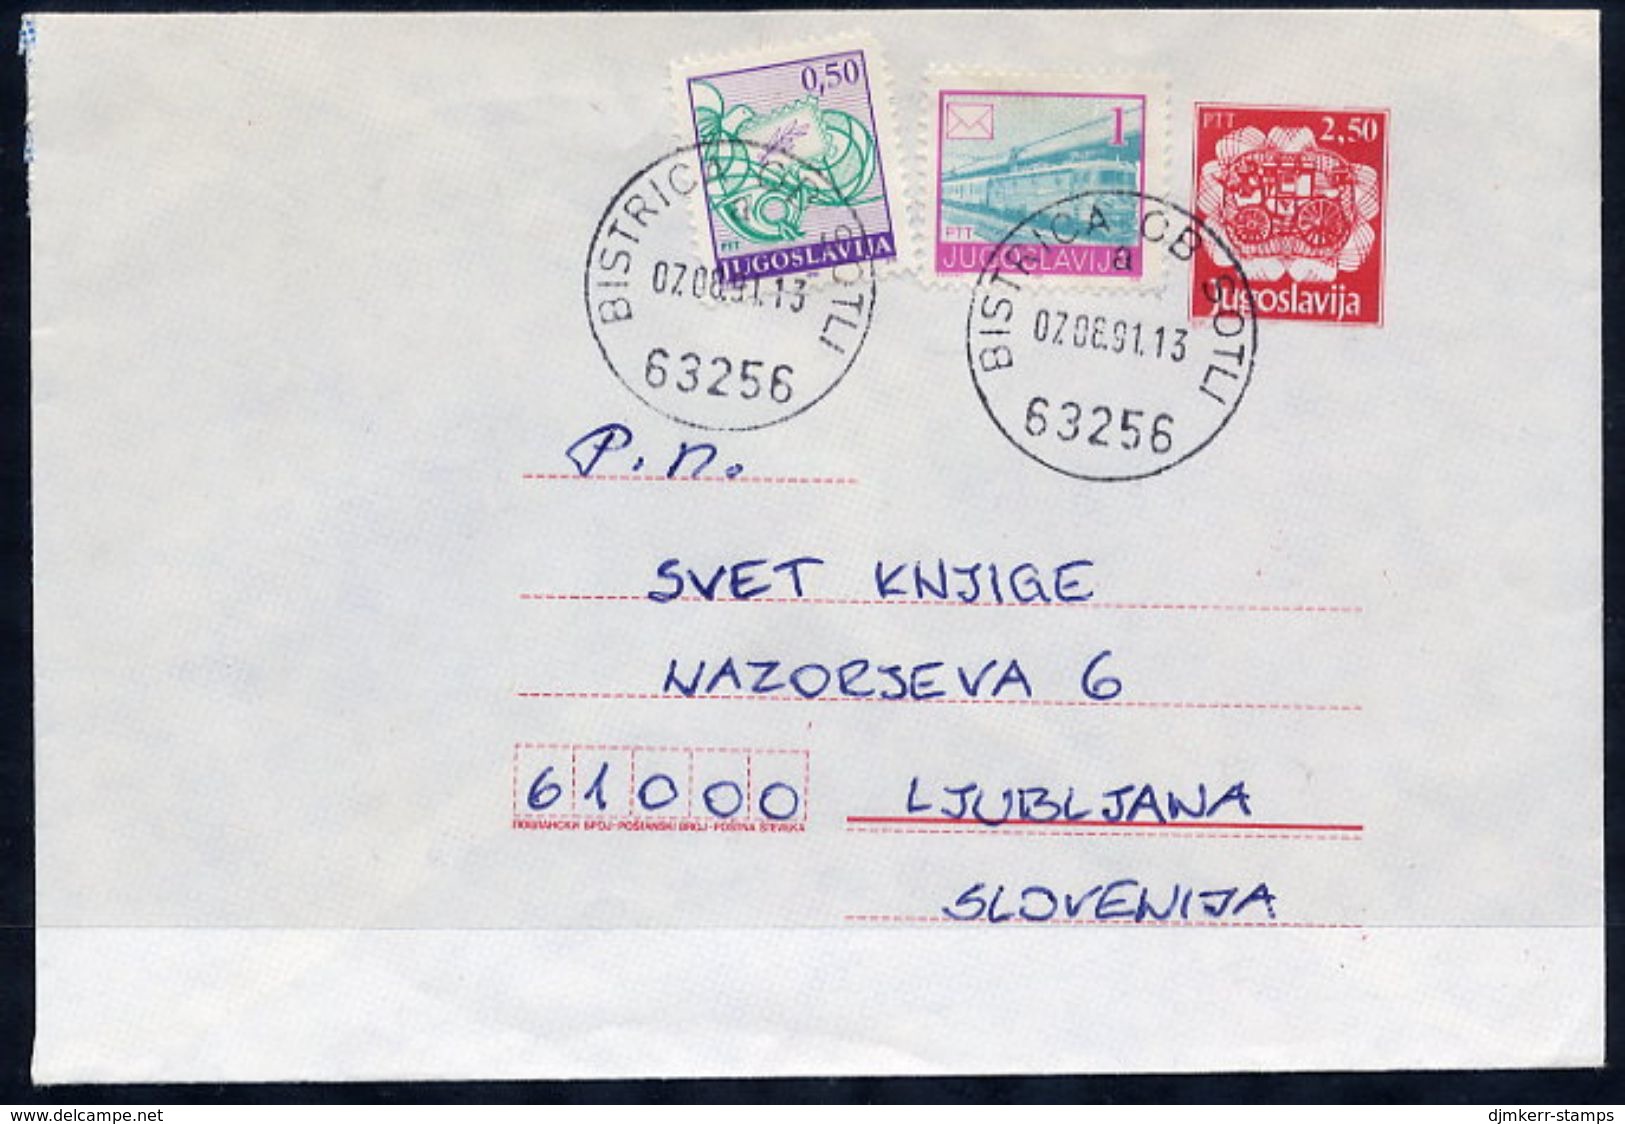 YUGOSLAVIA 1991 Mailcoach 2.50 D. Stationery Envelope Used With Additional Franking.  Michel U97 - Entiers Postaux